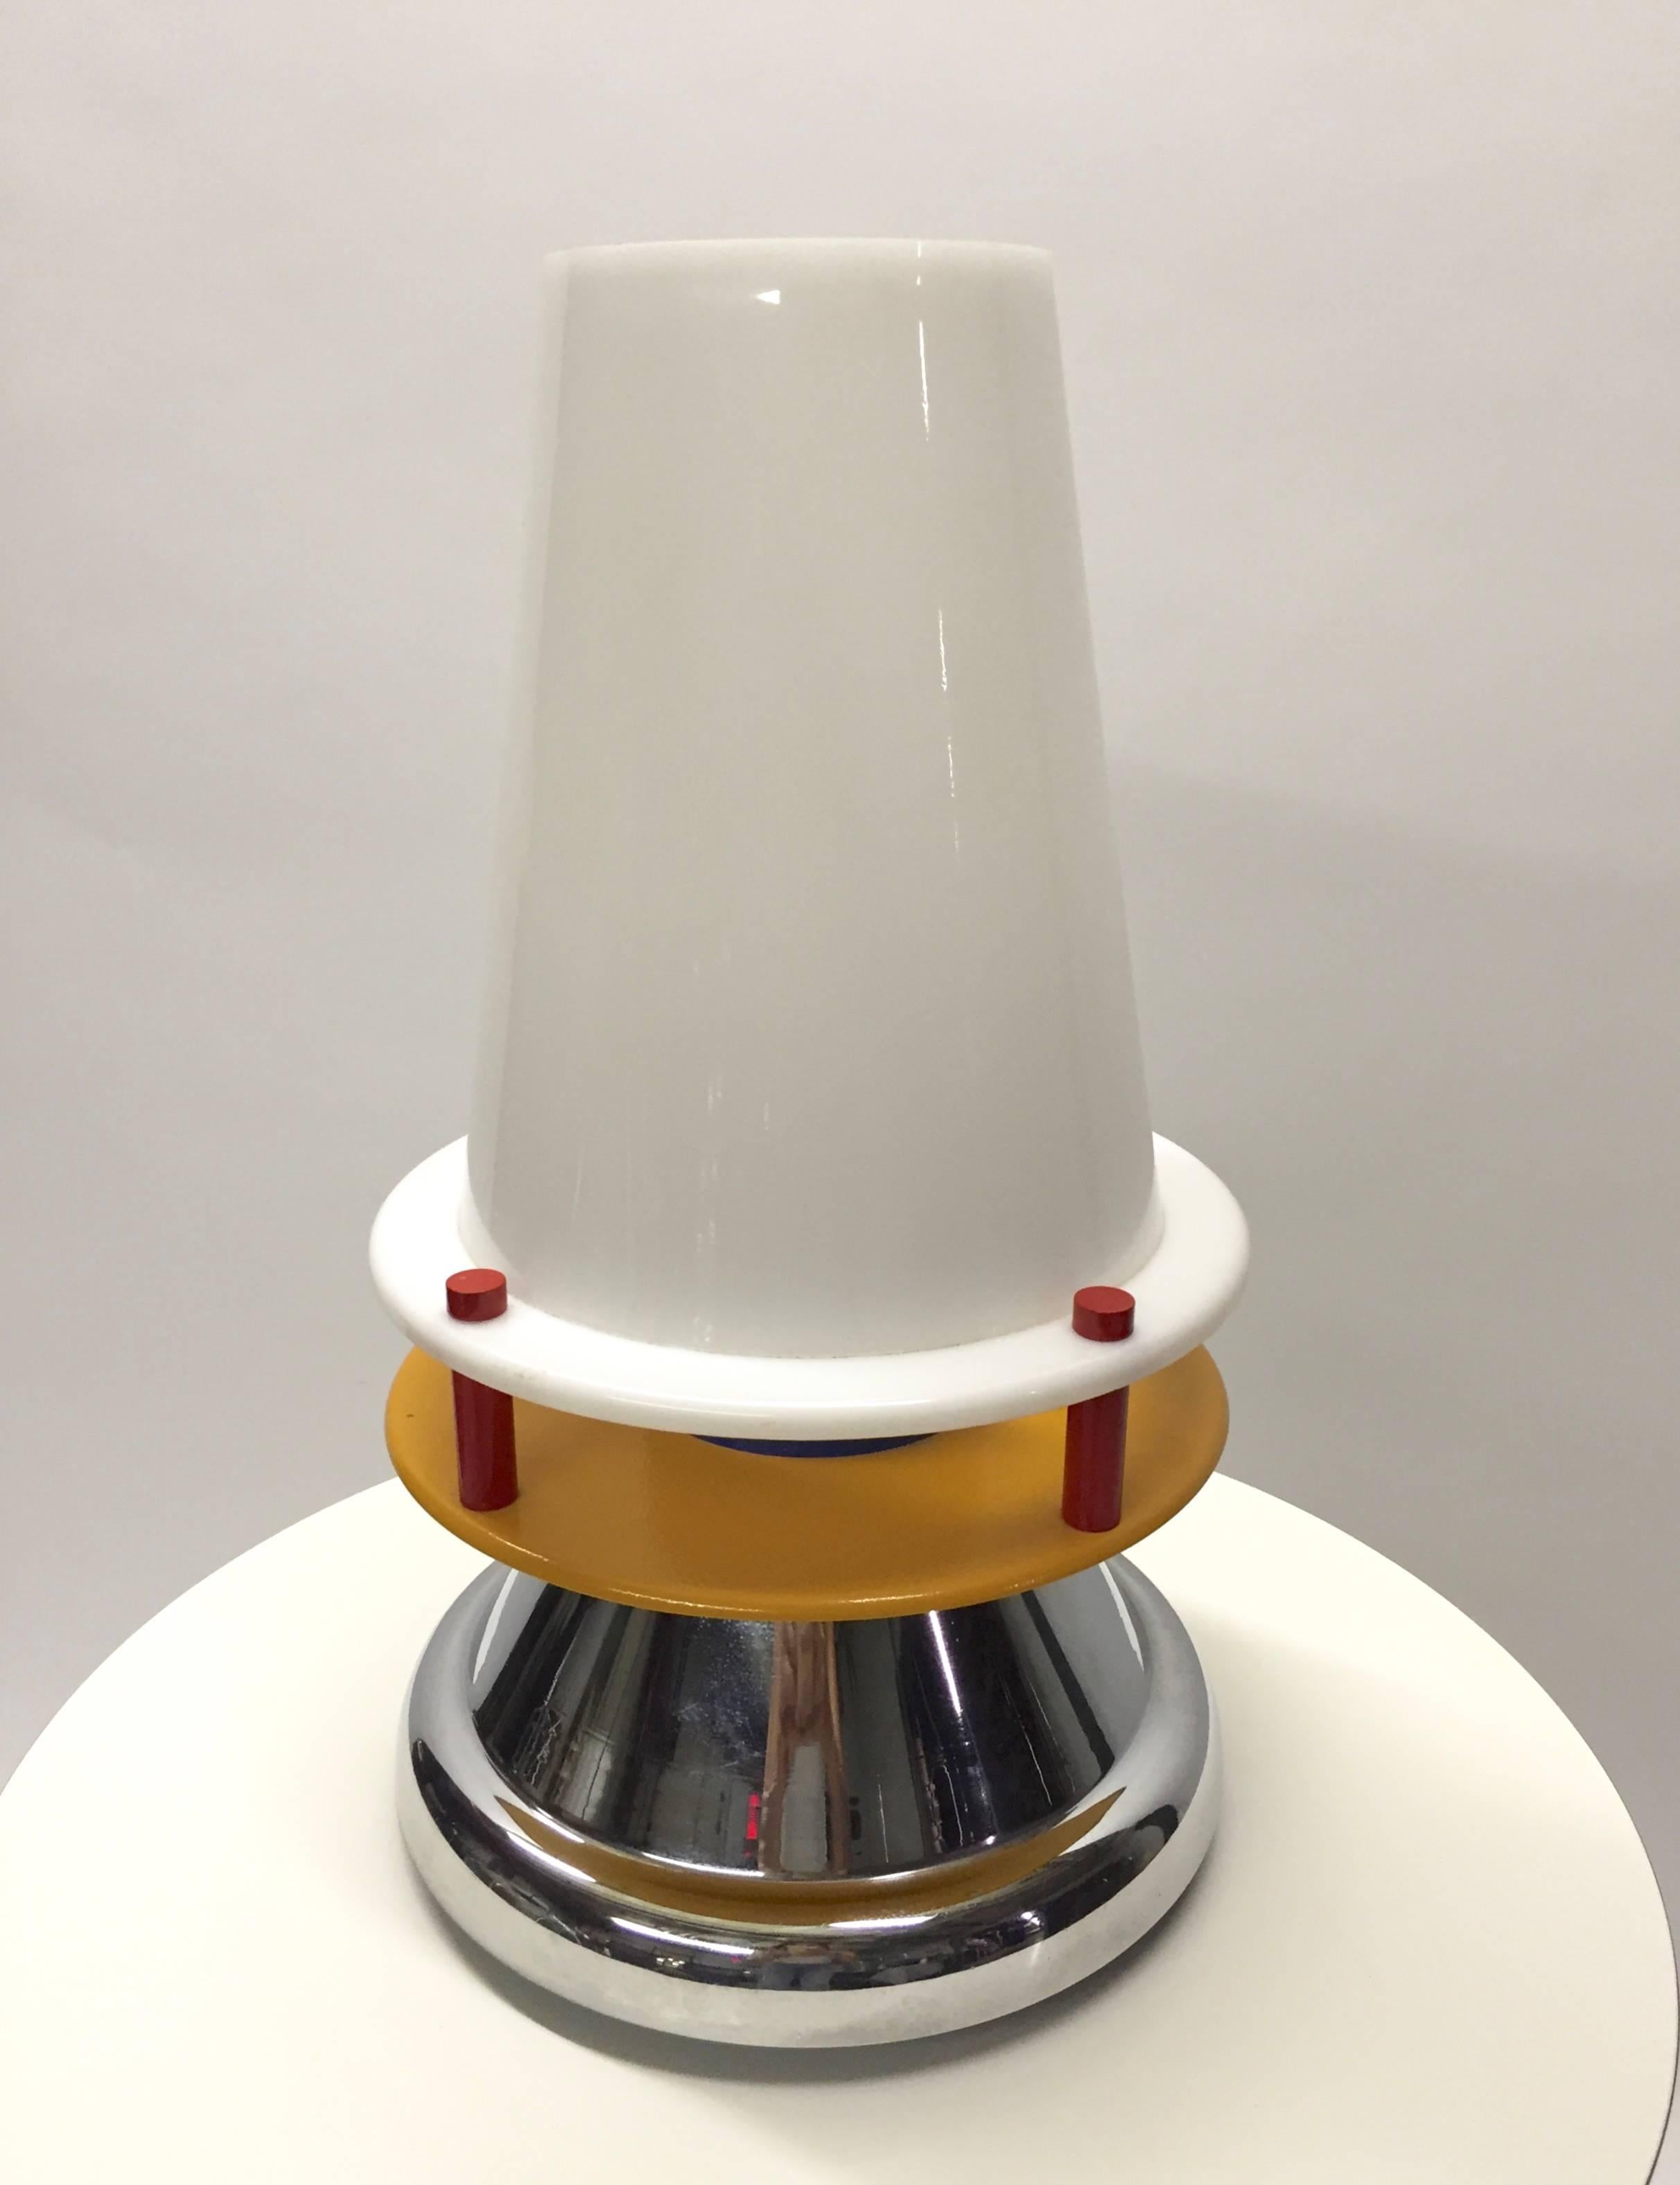 Mid-Century Modern Table Lamp by Nathalie du Pasquier for Memphis 1986 Made in Italy